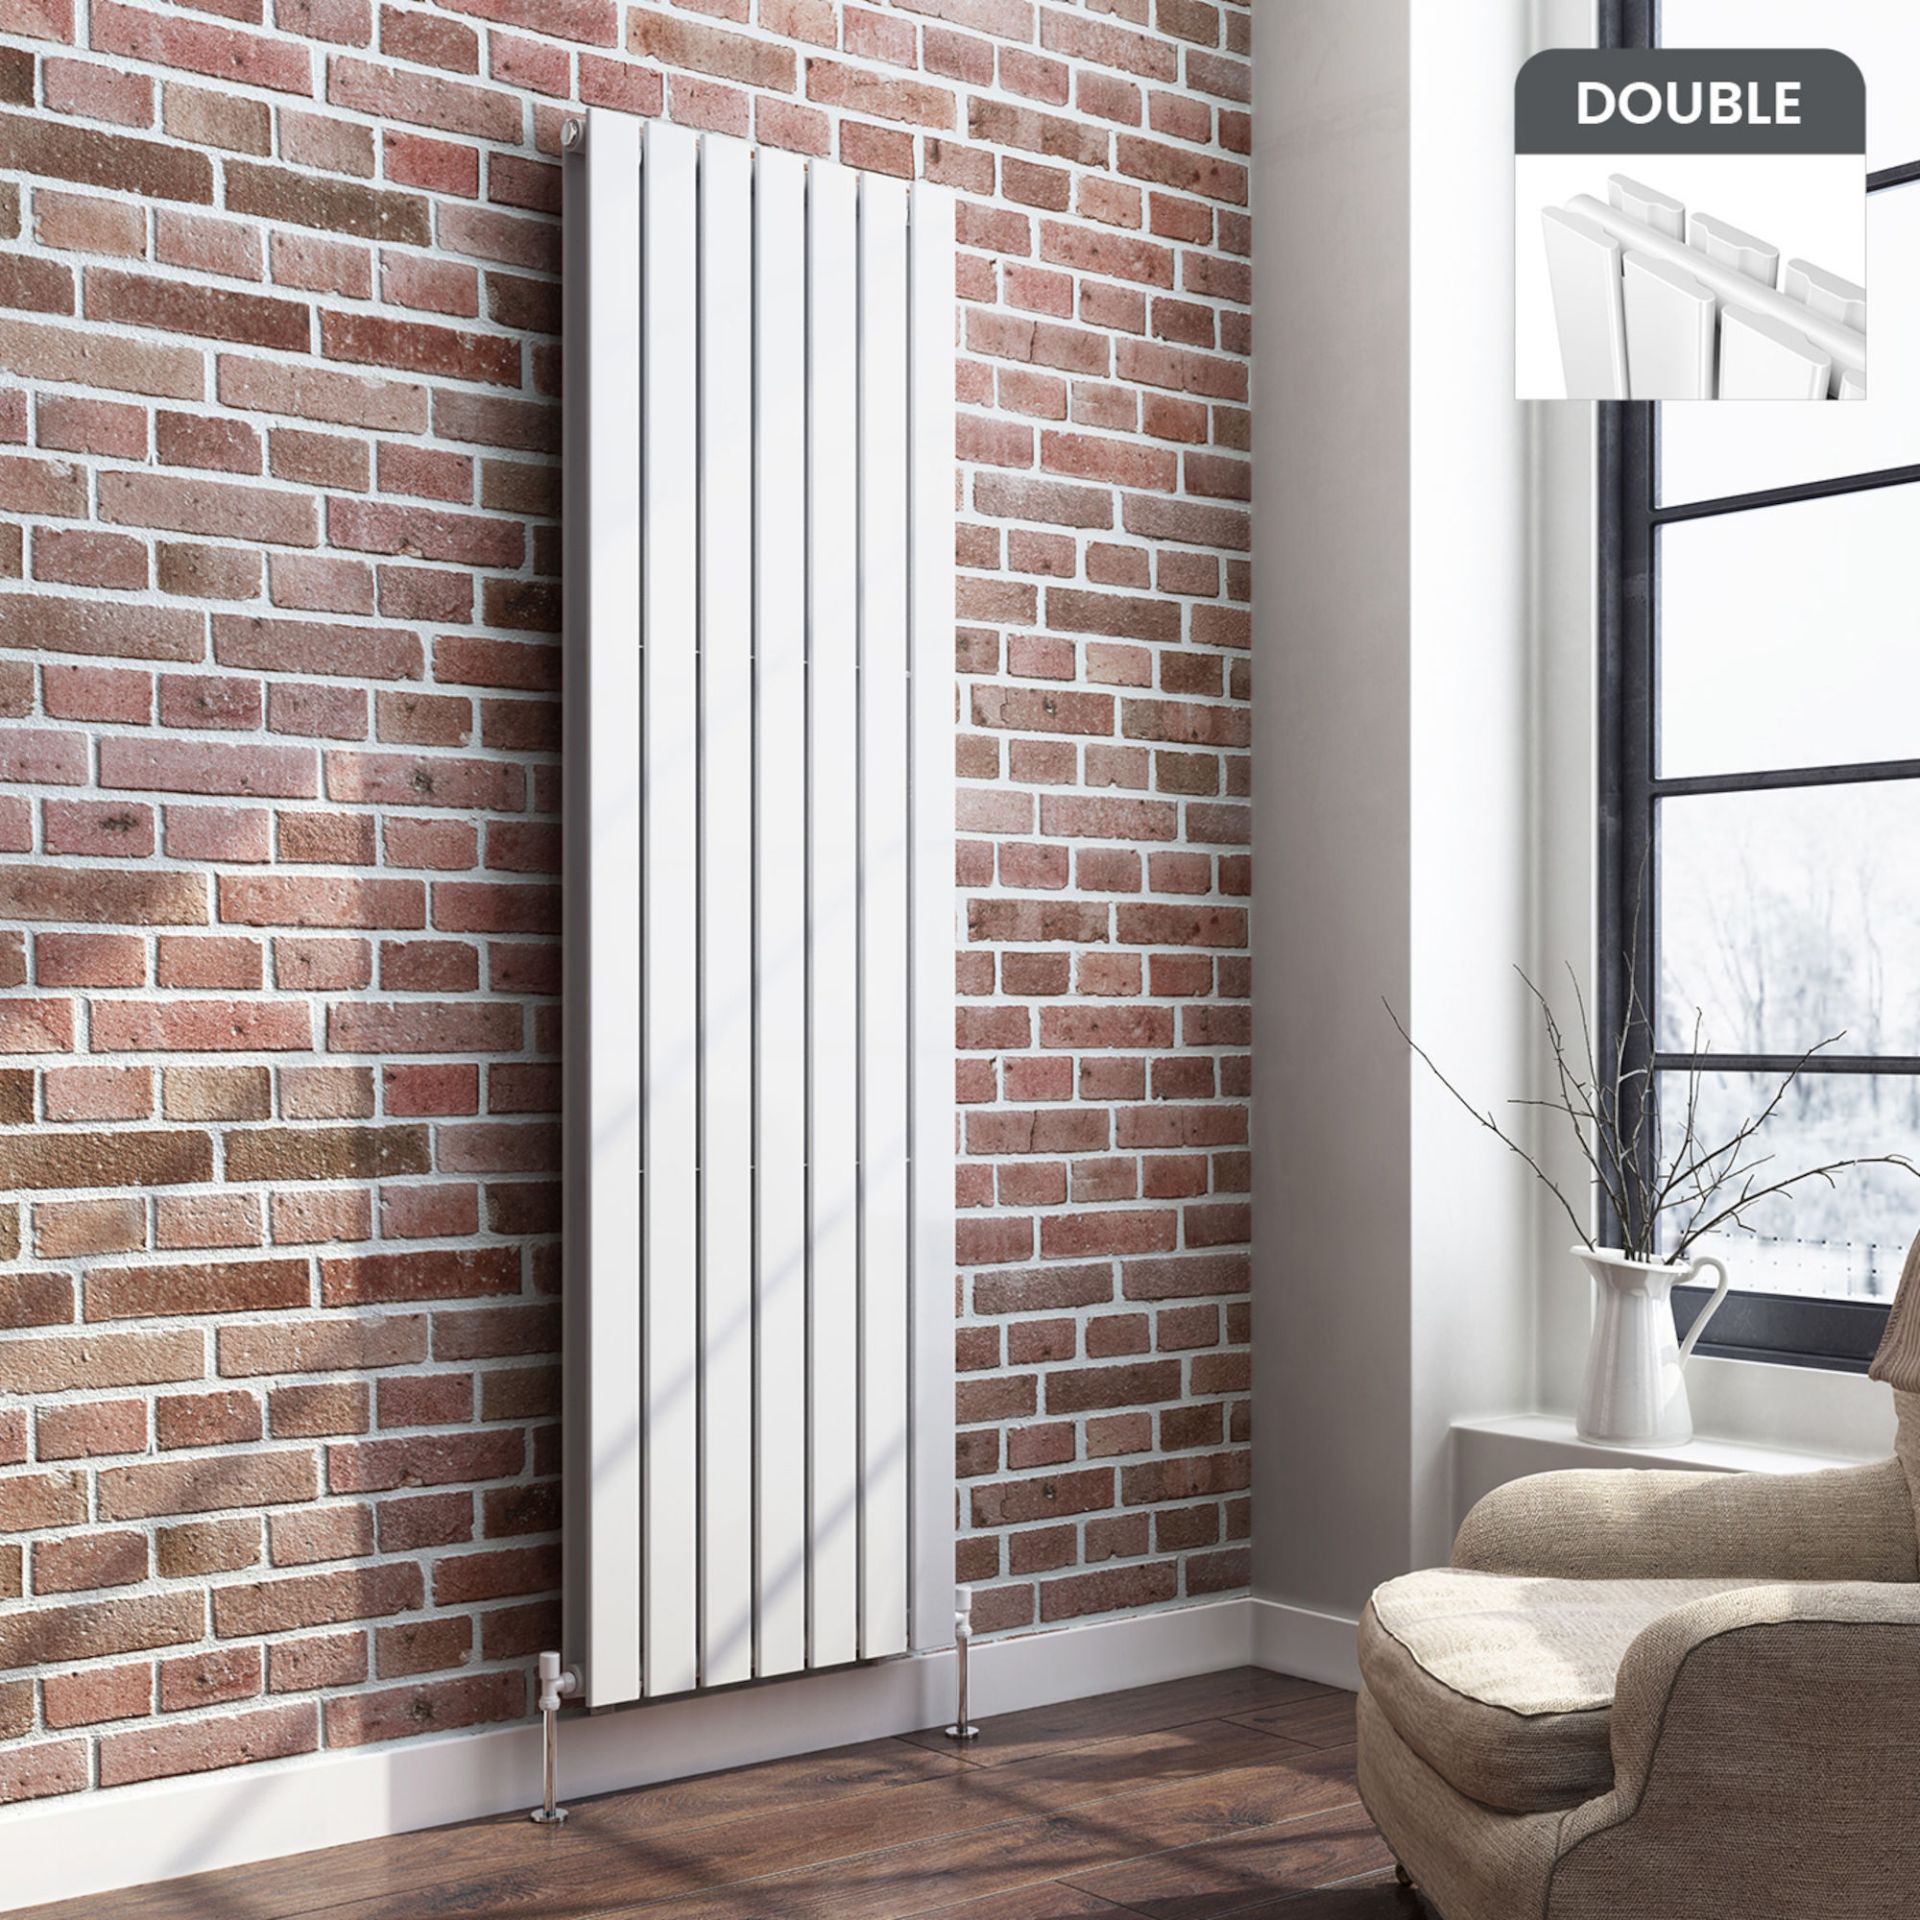 (LL46) 1800x532mm Gloss White Double Flat Panel Vertical Radiator. RRP £499.99. Made from high